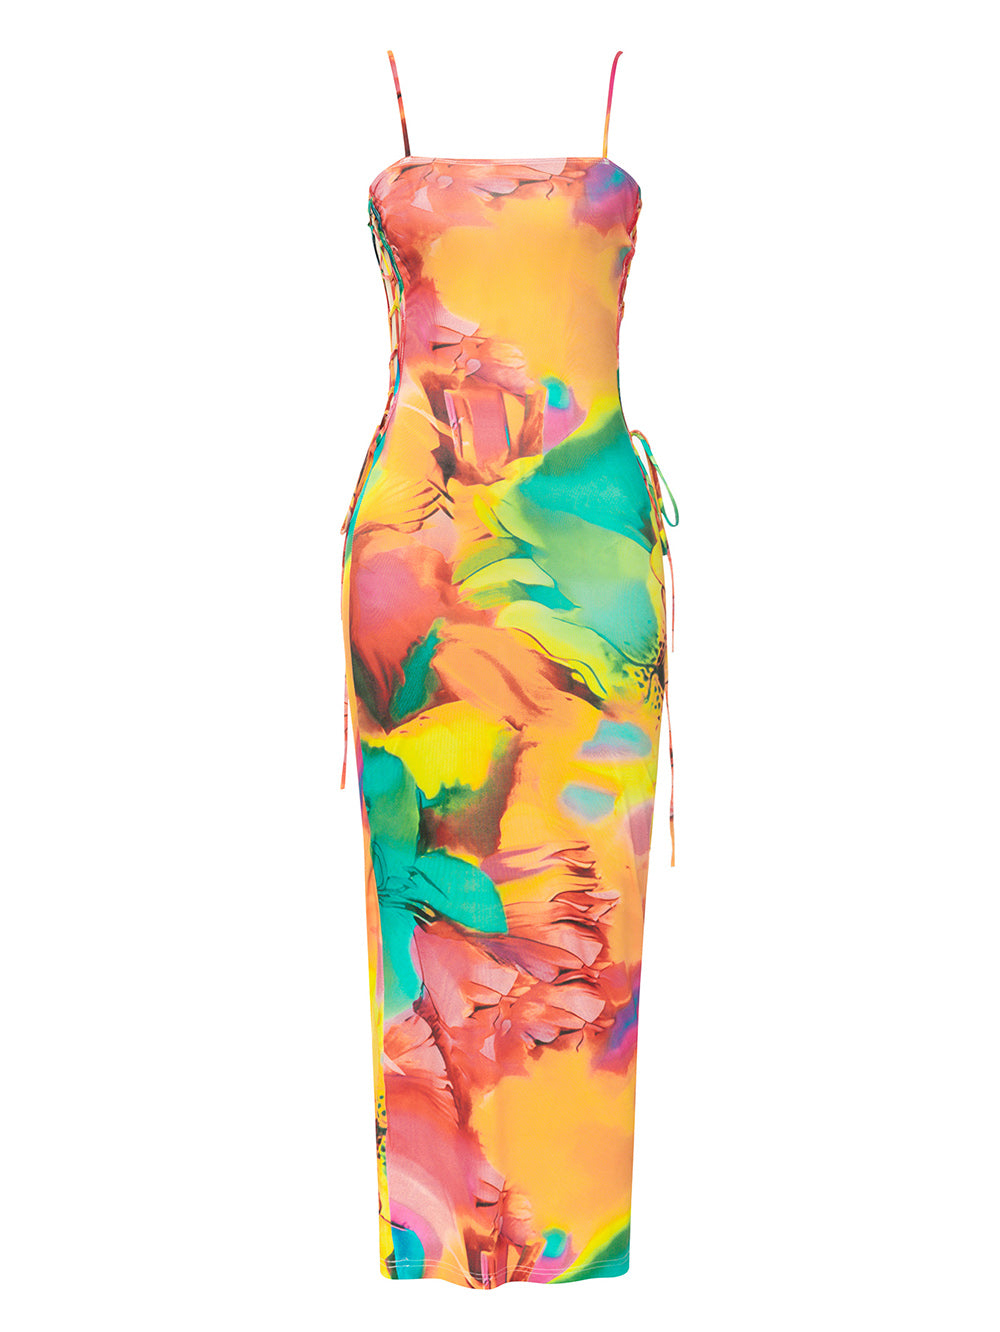 Colorful Bodycon Dress HB00642